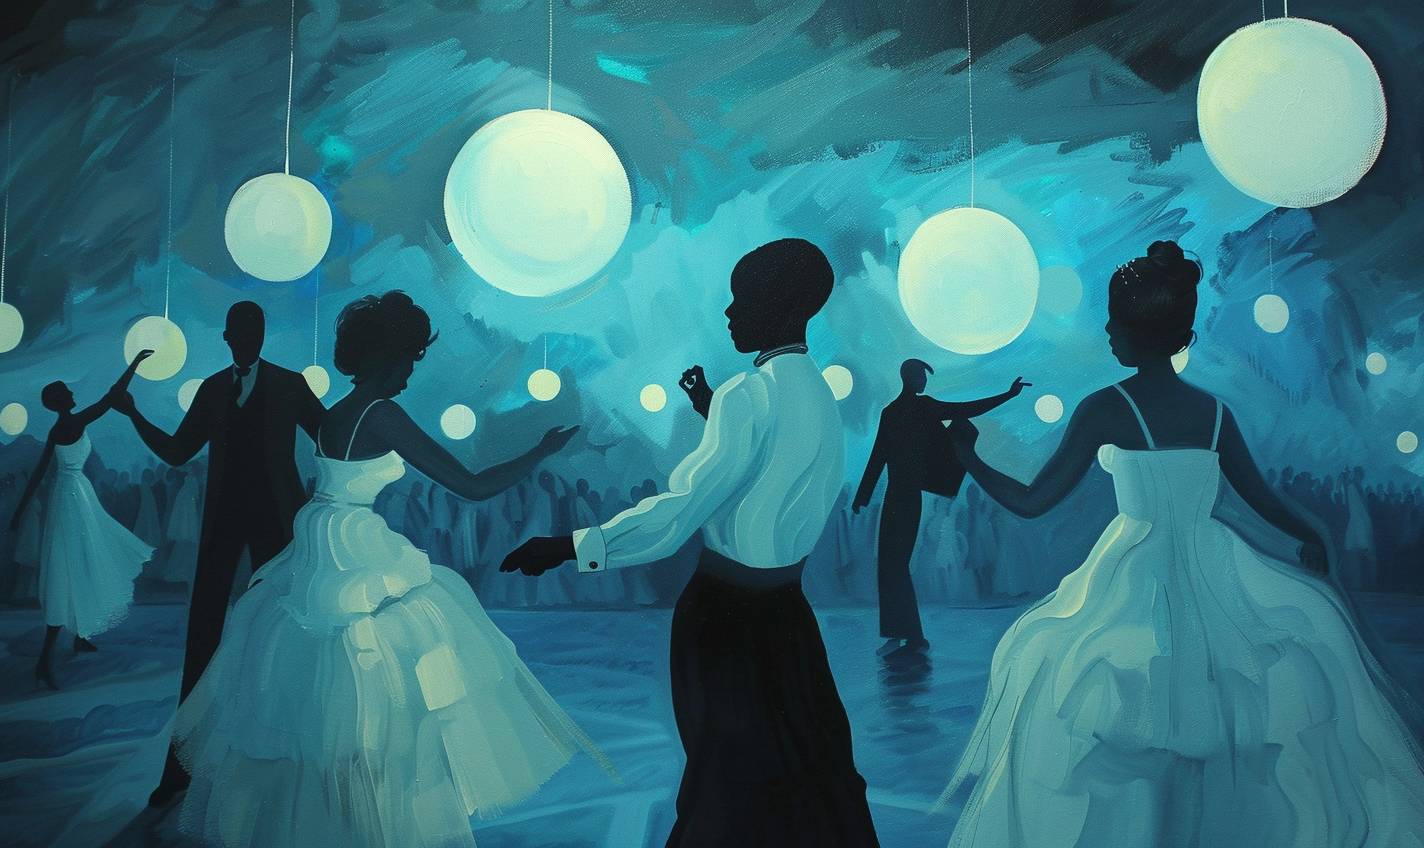 In style of Amy Sherald, Ethereal ballroom with phantom dancers